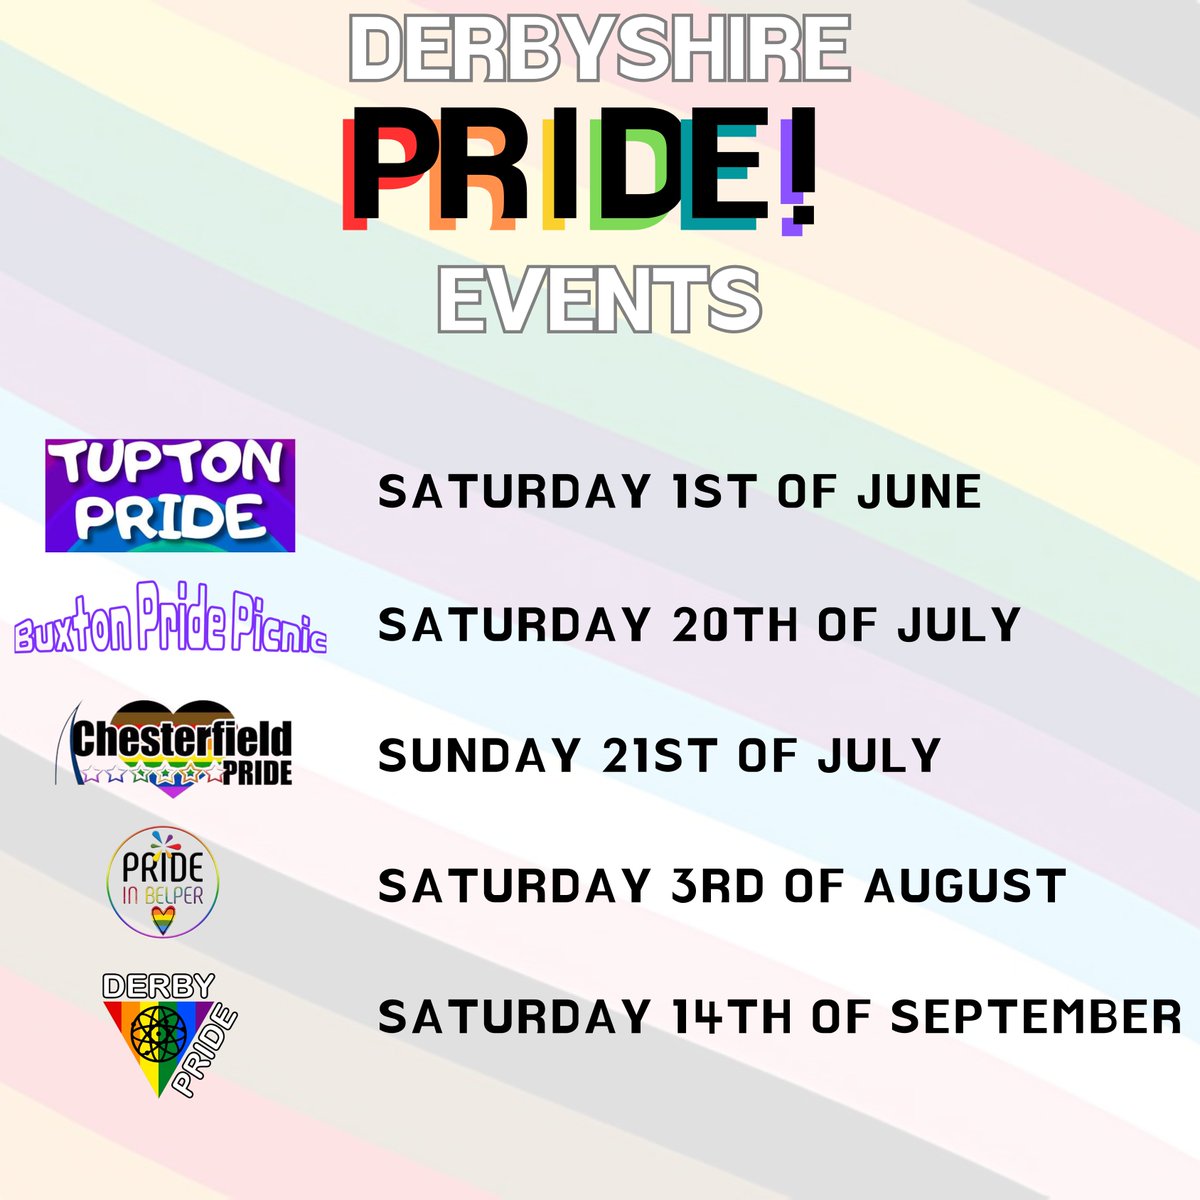 Pride season is just around the corner and Derbyshire has some fantastic Pride events! ✨🏳️‍⚧️🏳️‍🌈